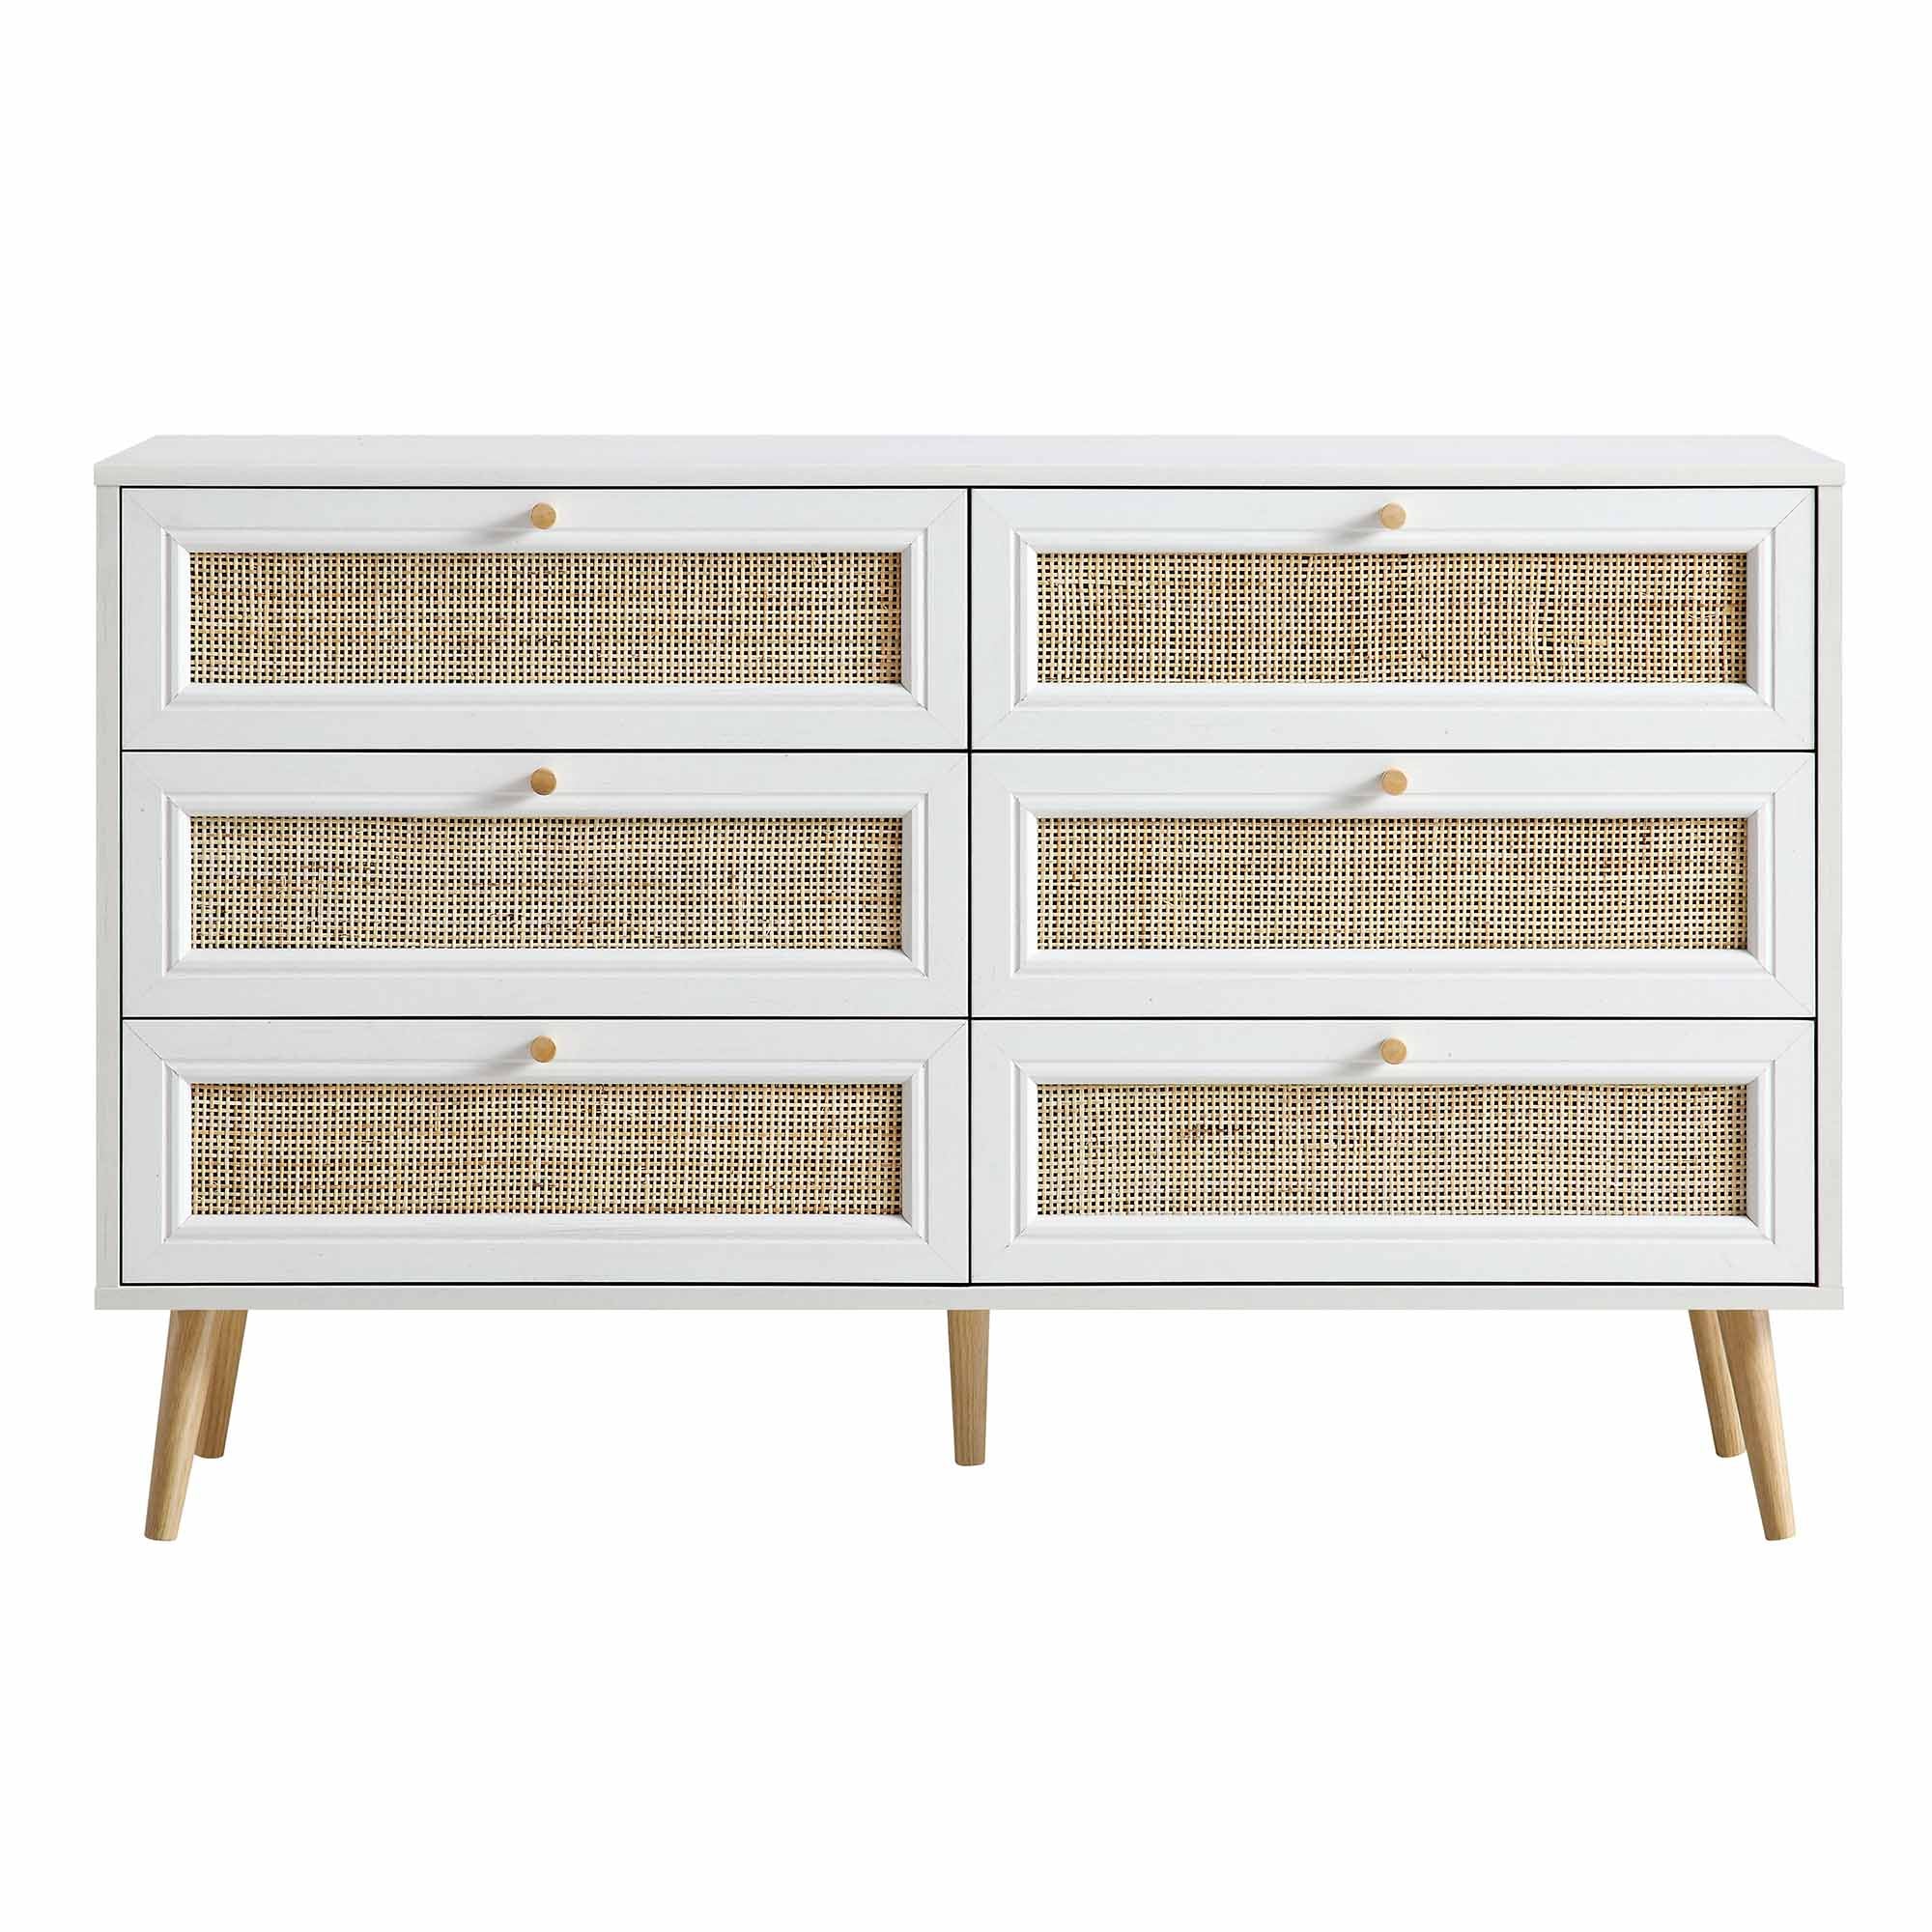 Frances Woven Rattan Chest of 6 Drawers, White